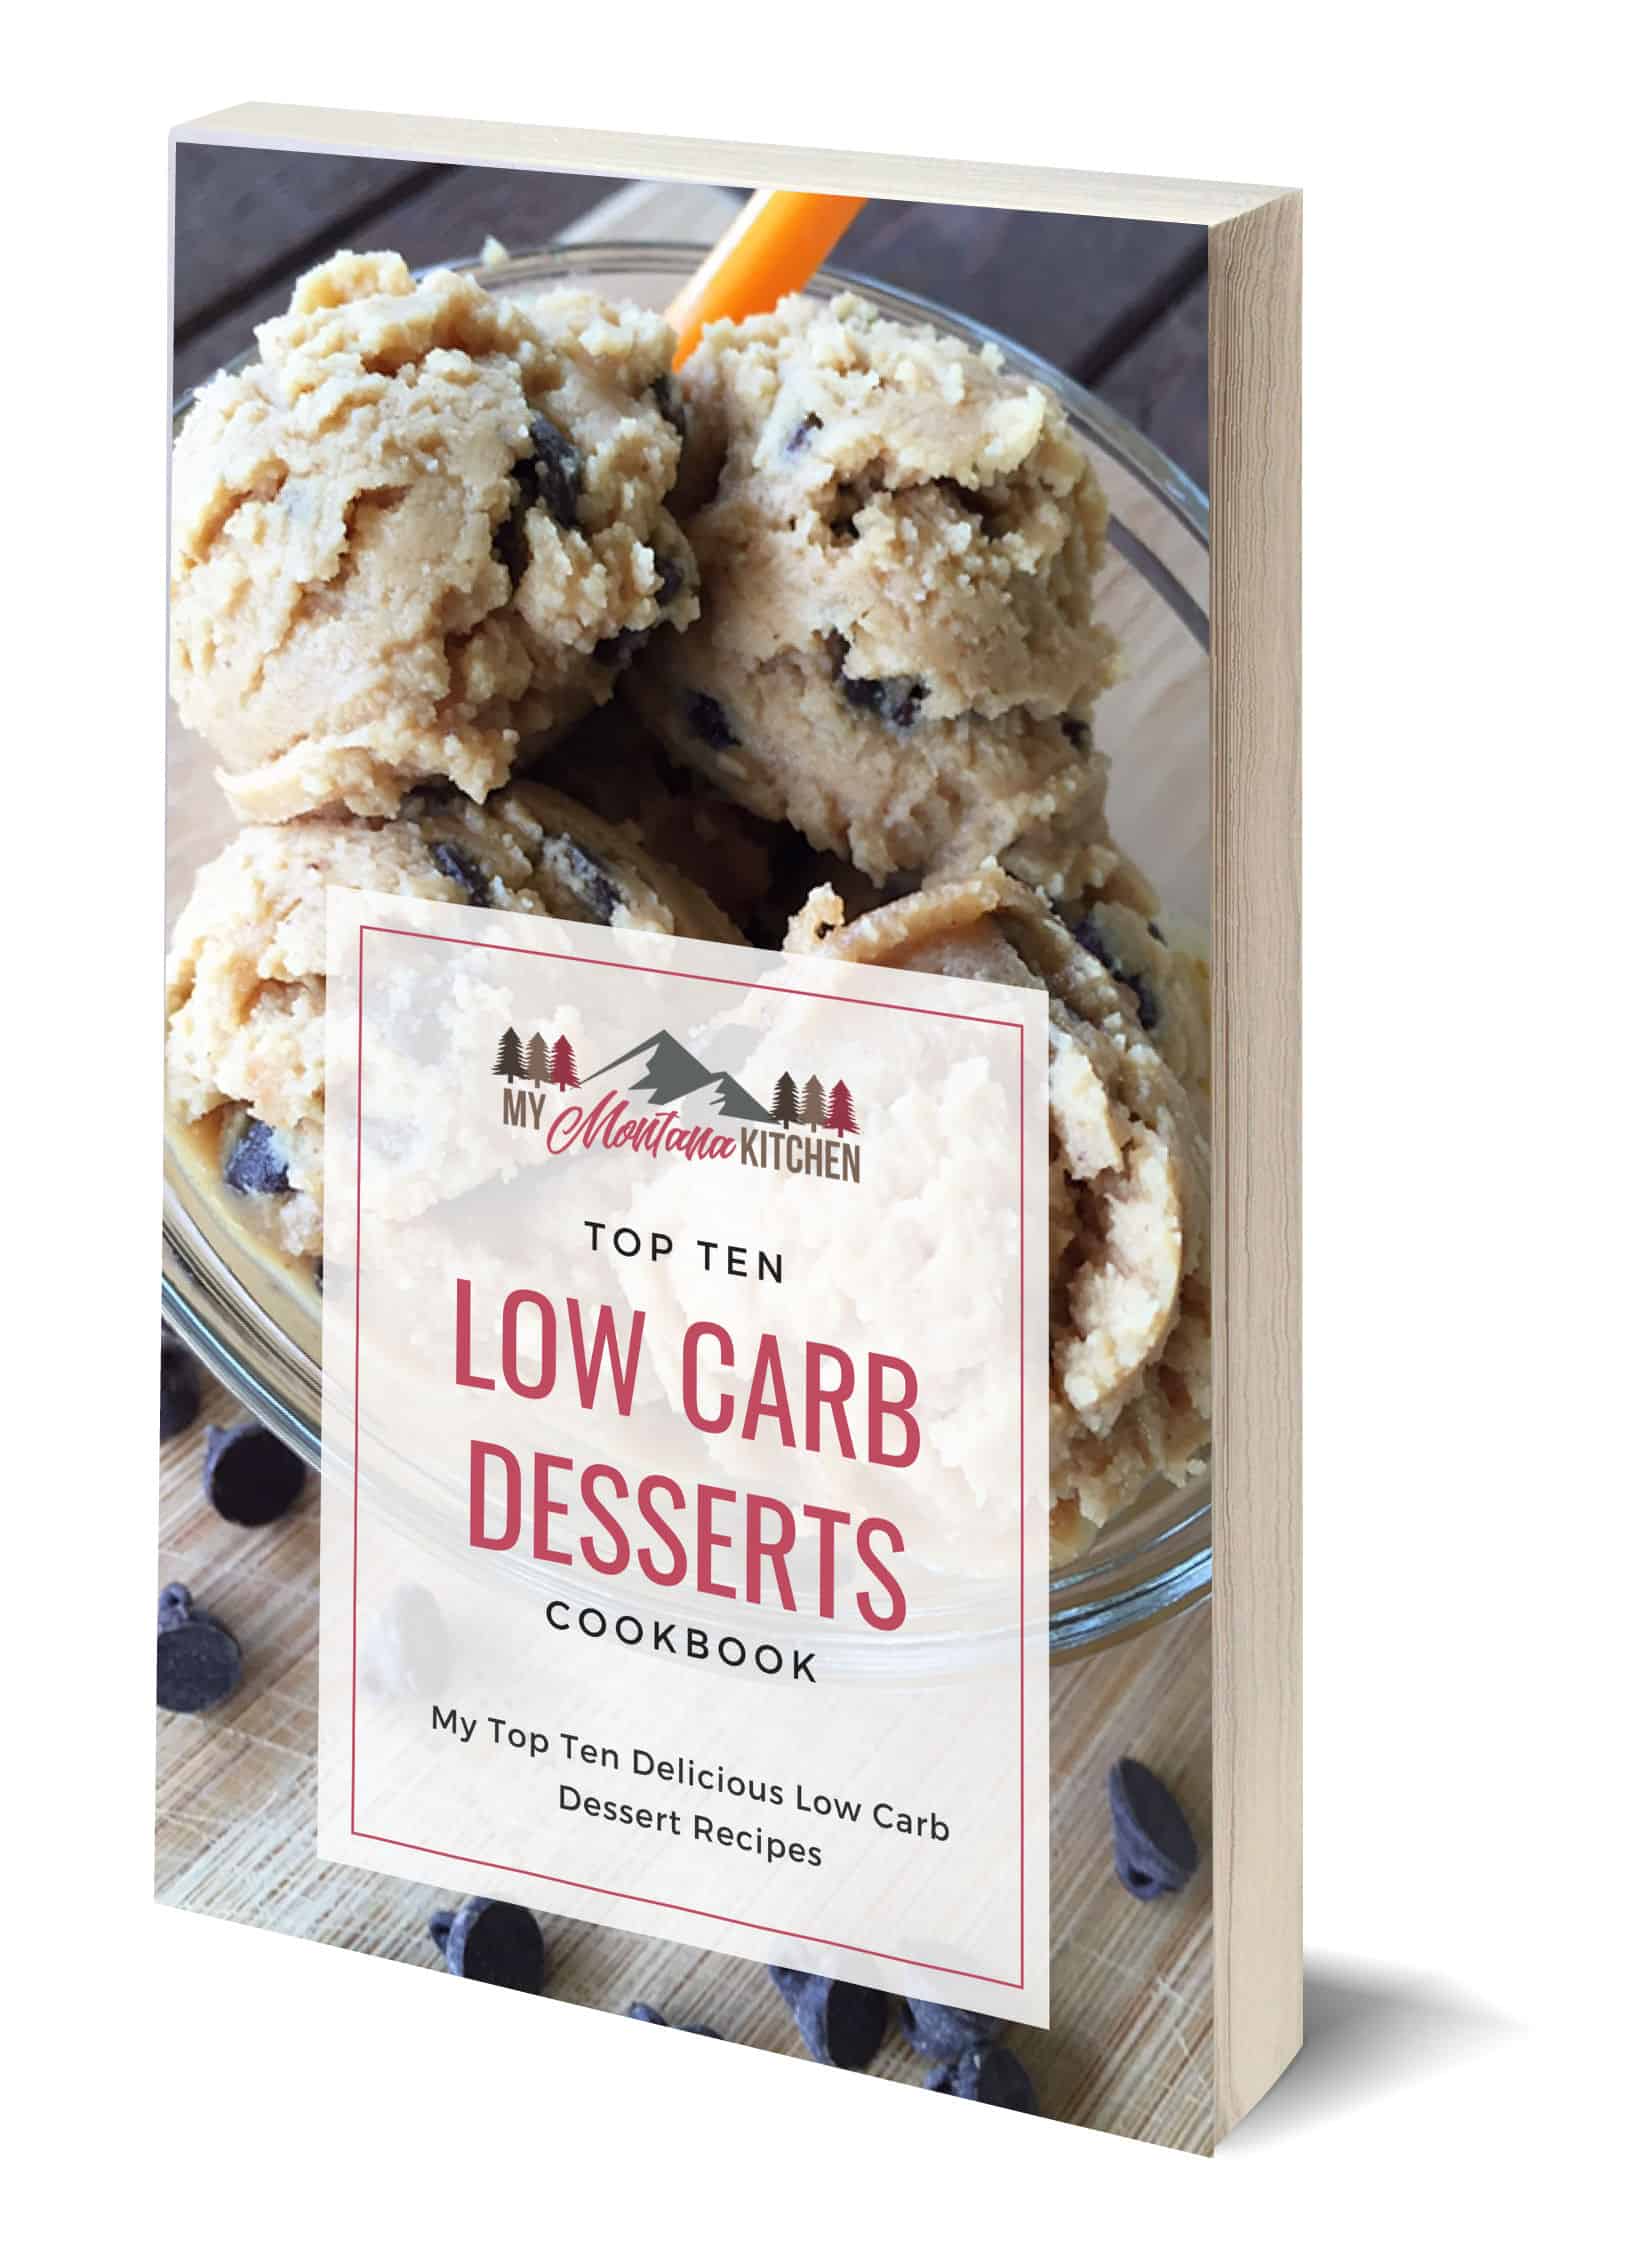 This simple ebook of Top 10 Low Carb Desserts shows you just how simple it can be to have delicious, low carb, healthy sweet treats!